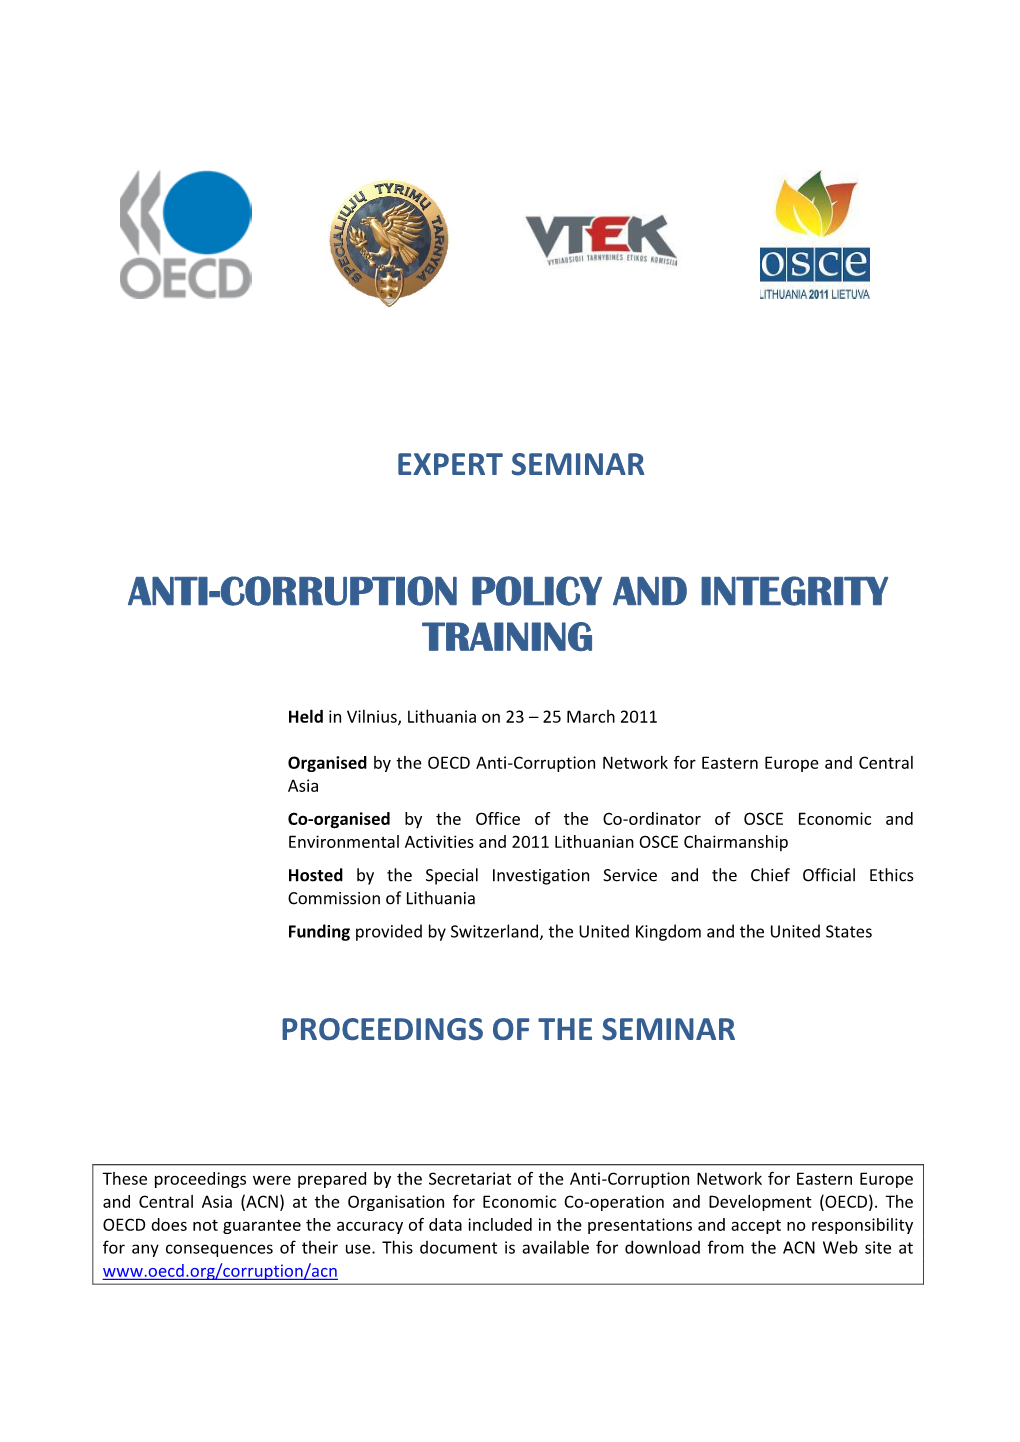 Anti-Corruption Policy and Integrity Training